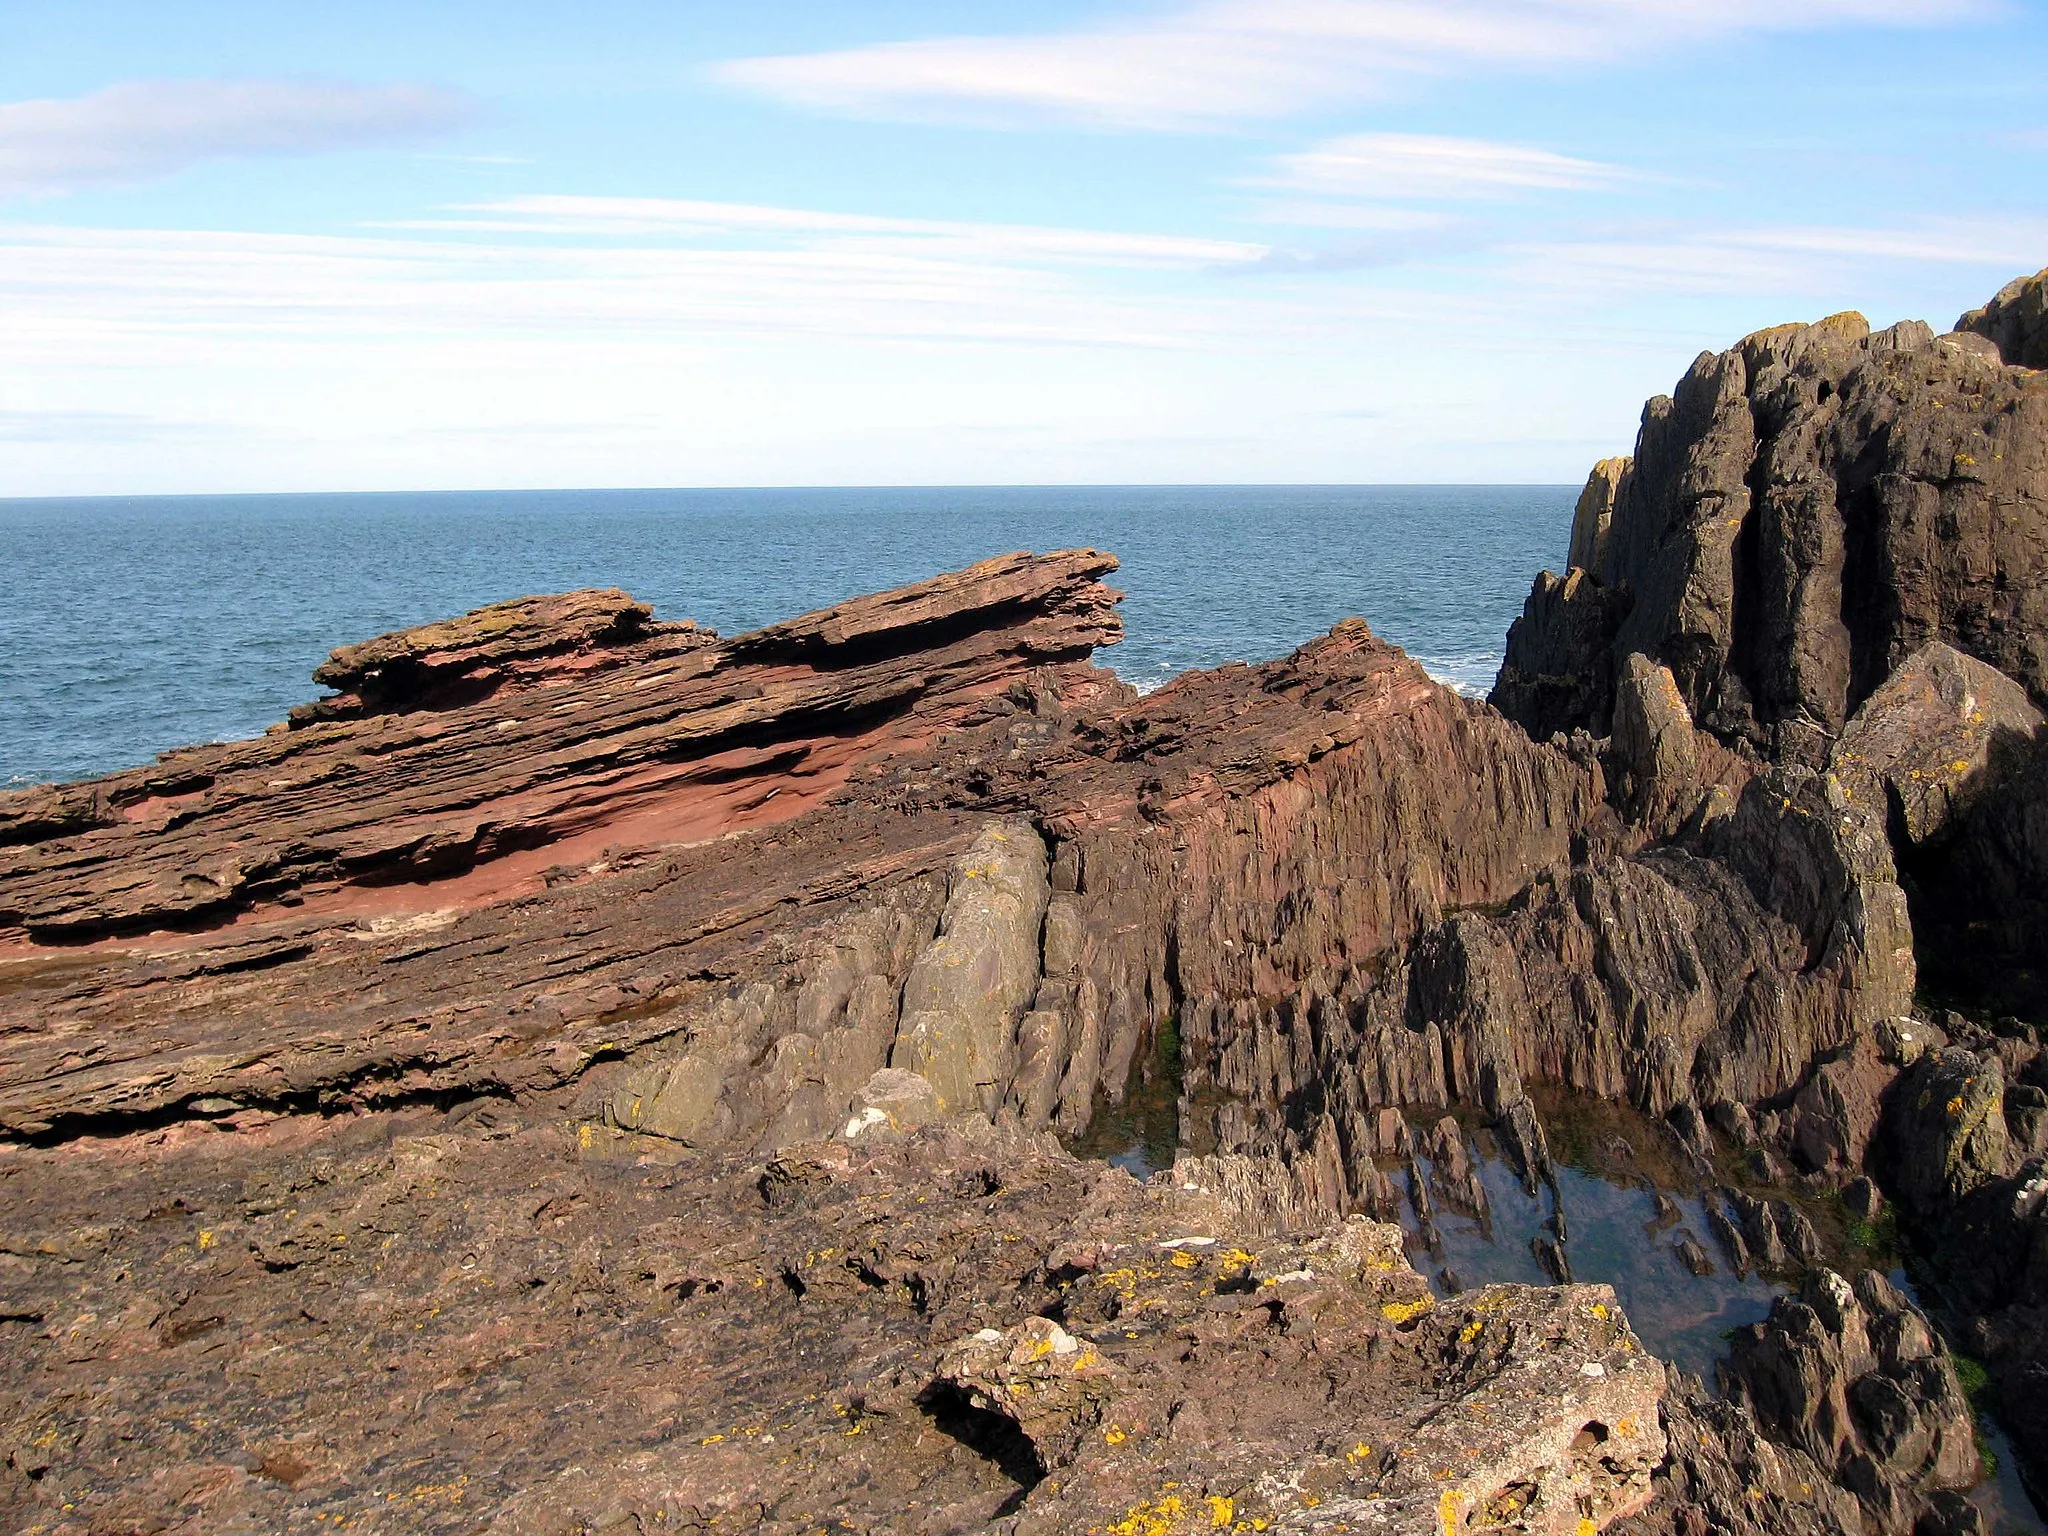 Photo showing: Siccar Point, eroded gently sloping Devonian Old Red Sandstone layers forming capping over conglomerate layer and older vertically bedded Silurian greywacke rocks.